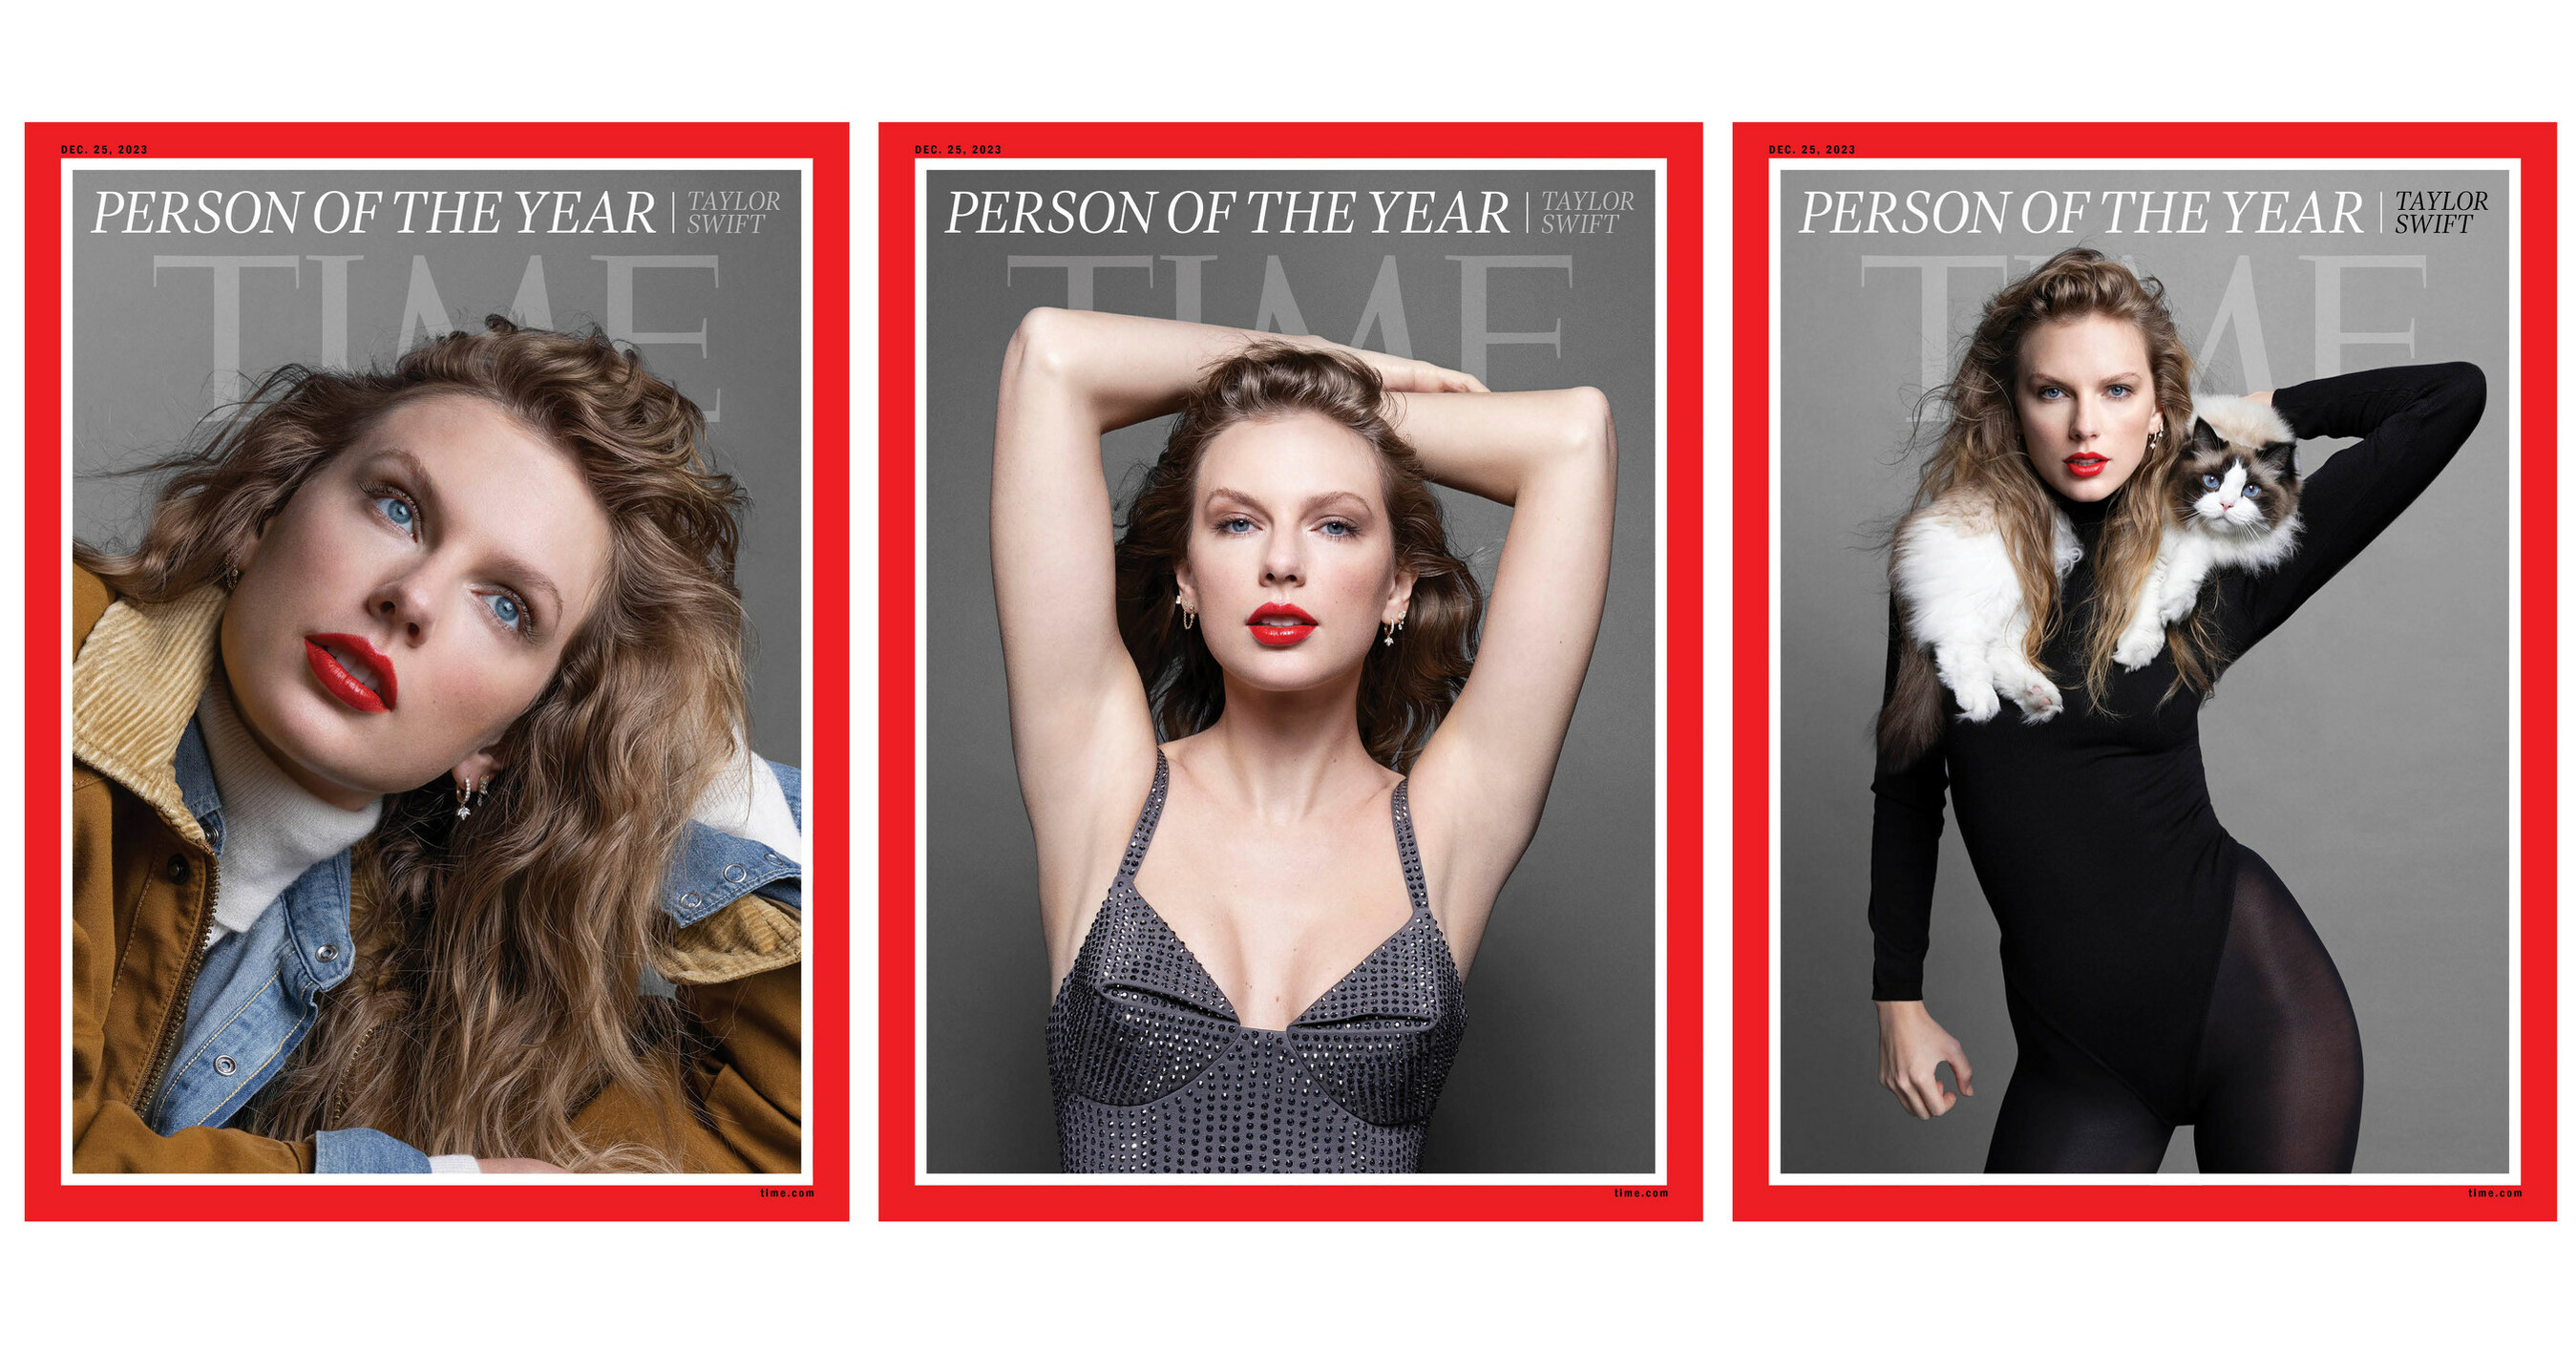 Taylor Swift photos from Time Person of the Year 2023 covers are art